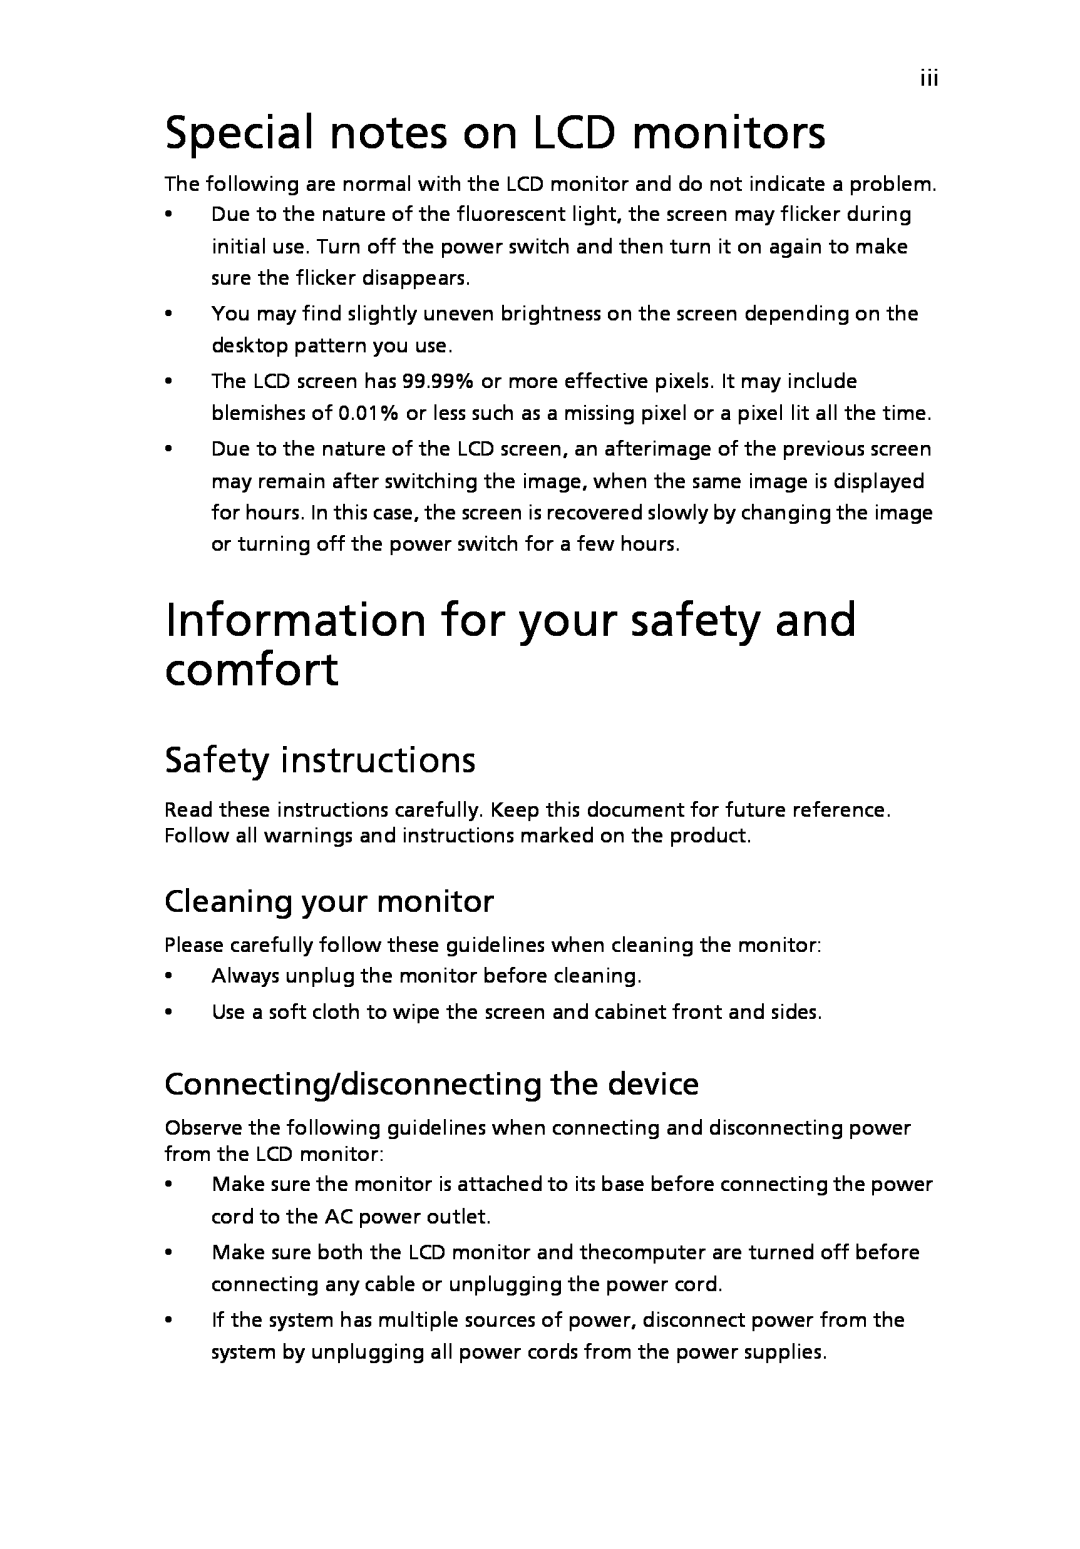 Acer V193 manual Special notes on LCD monitors, Information for your safety and comfort, Safety instructions 